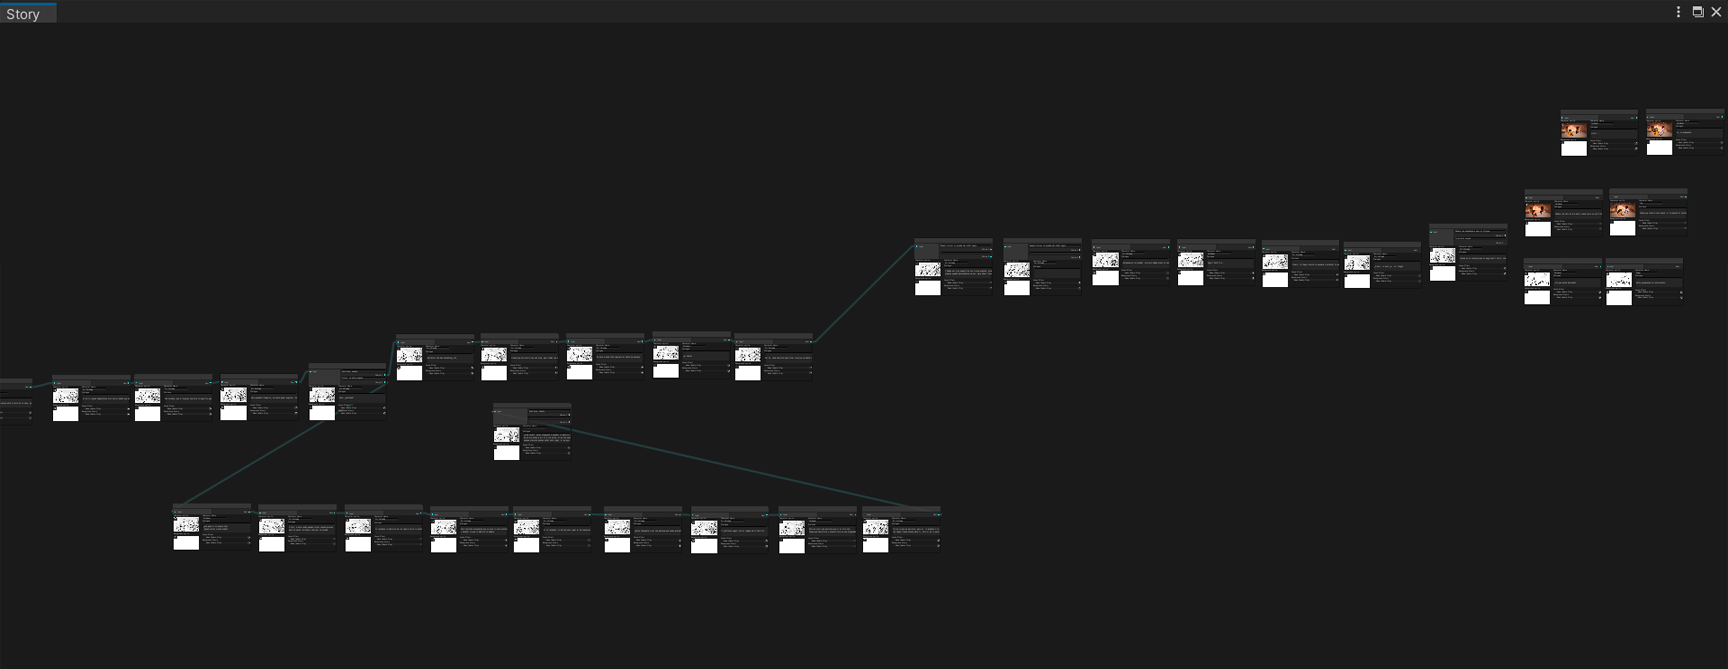 A glimpse at the narrative tree